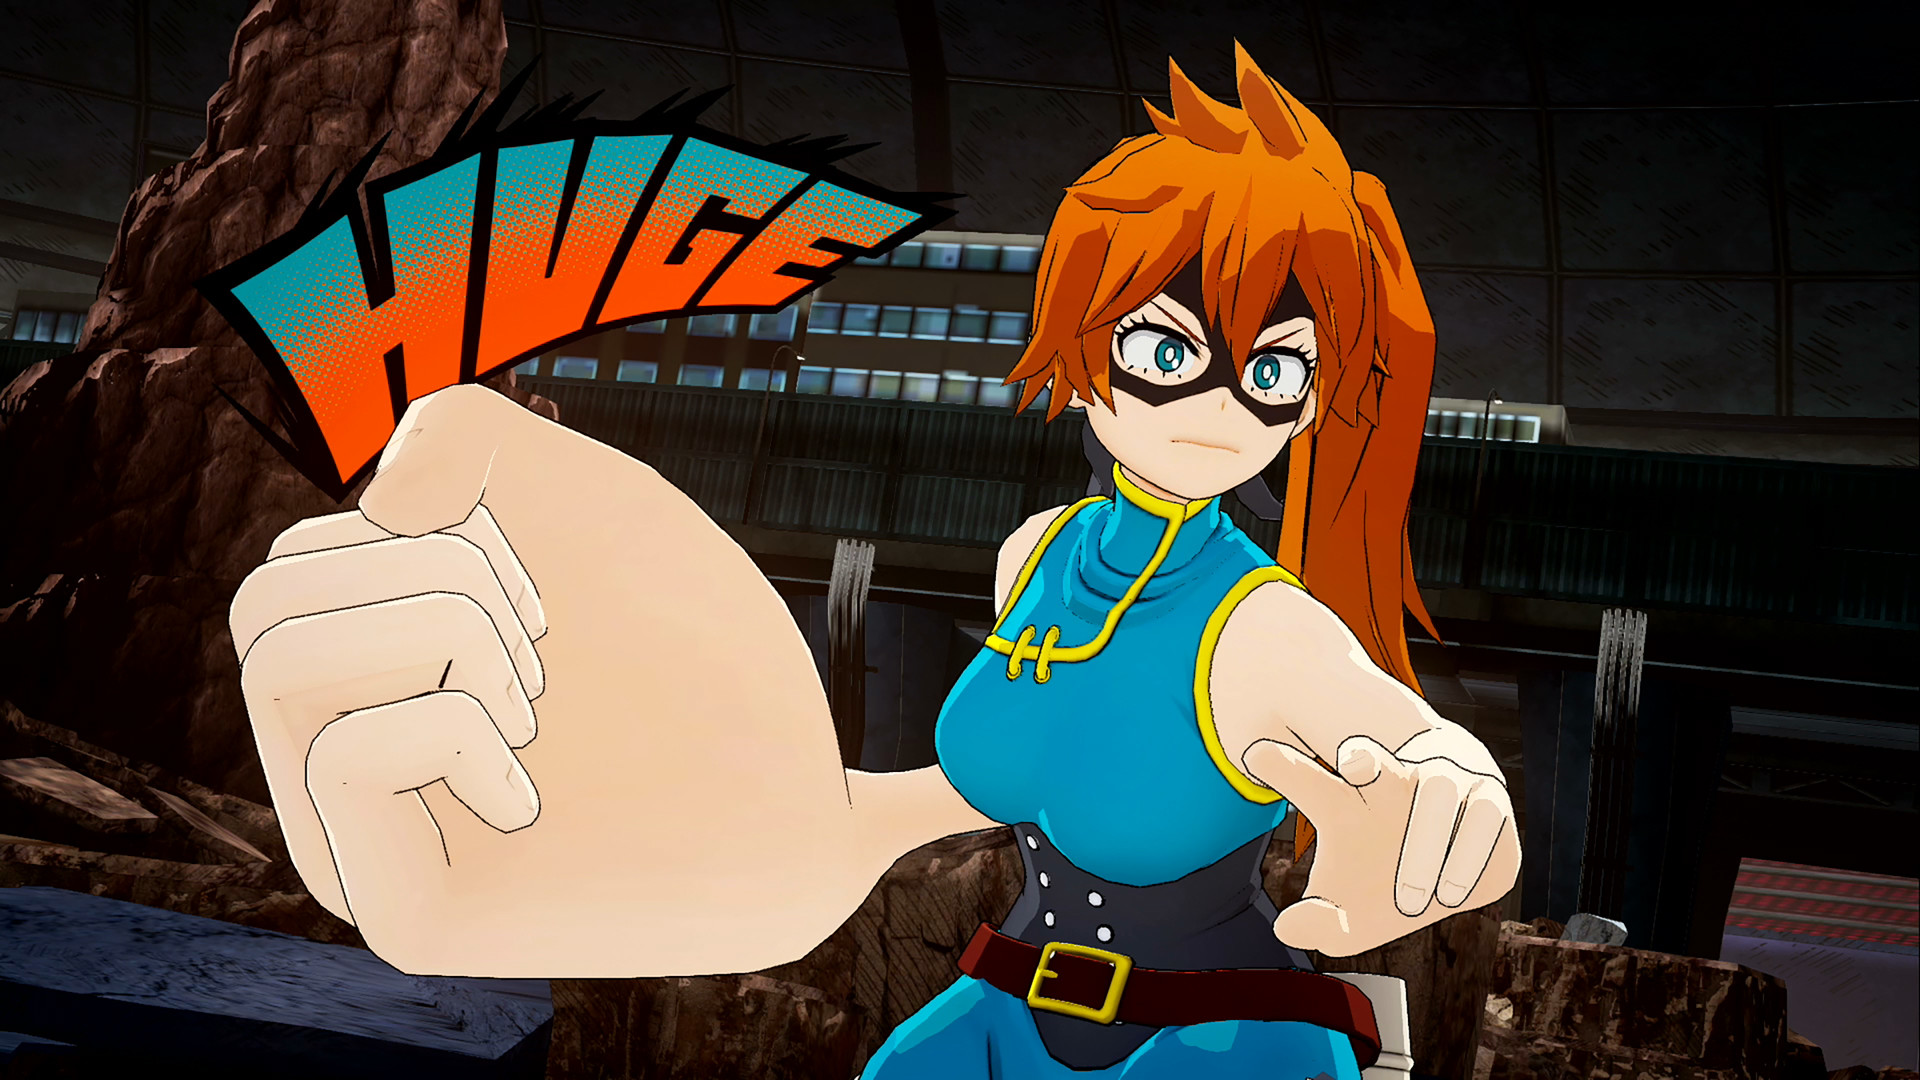 Save 85% on MY HERO ONE'S JUSTICE 2 on Steam